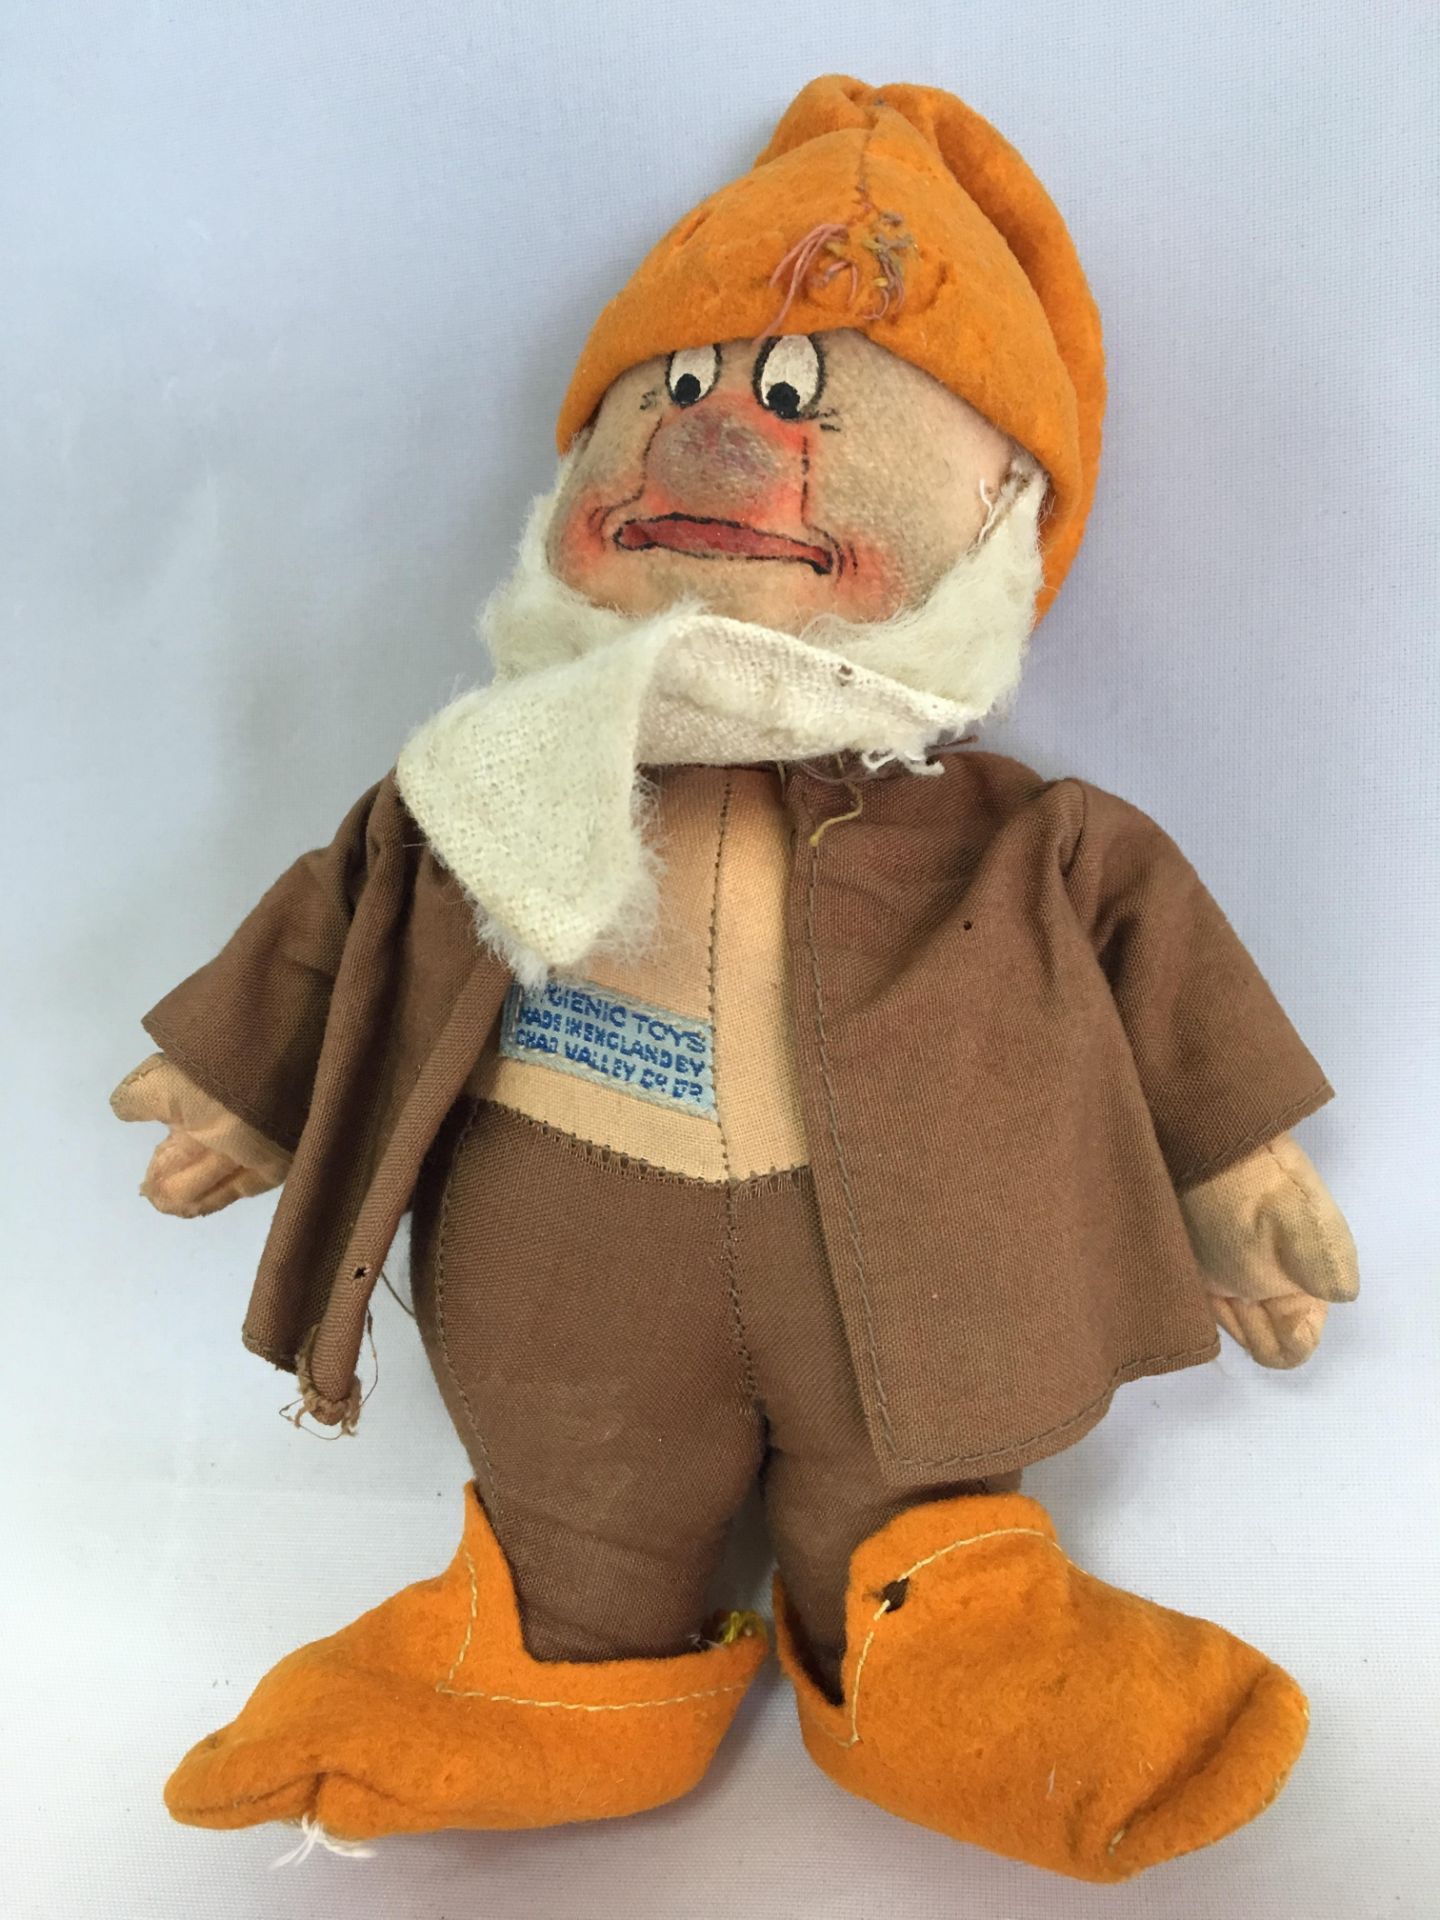 A VINTAGE CHAD VALLEY DWARF - GRUMPY - C. 1930s. WITH ORIGINAL LABEL, MOULDED AND PAINTED FELT FACE,